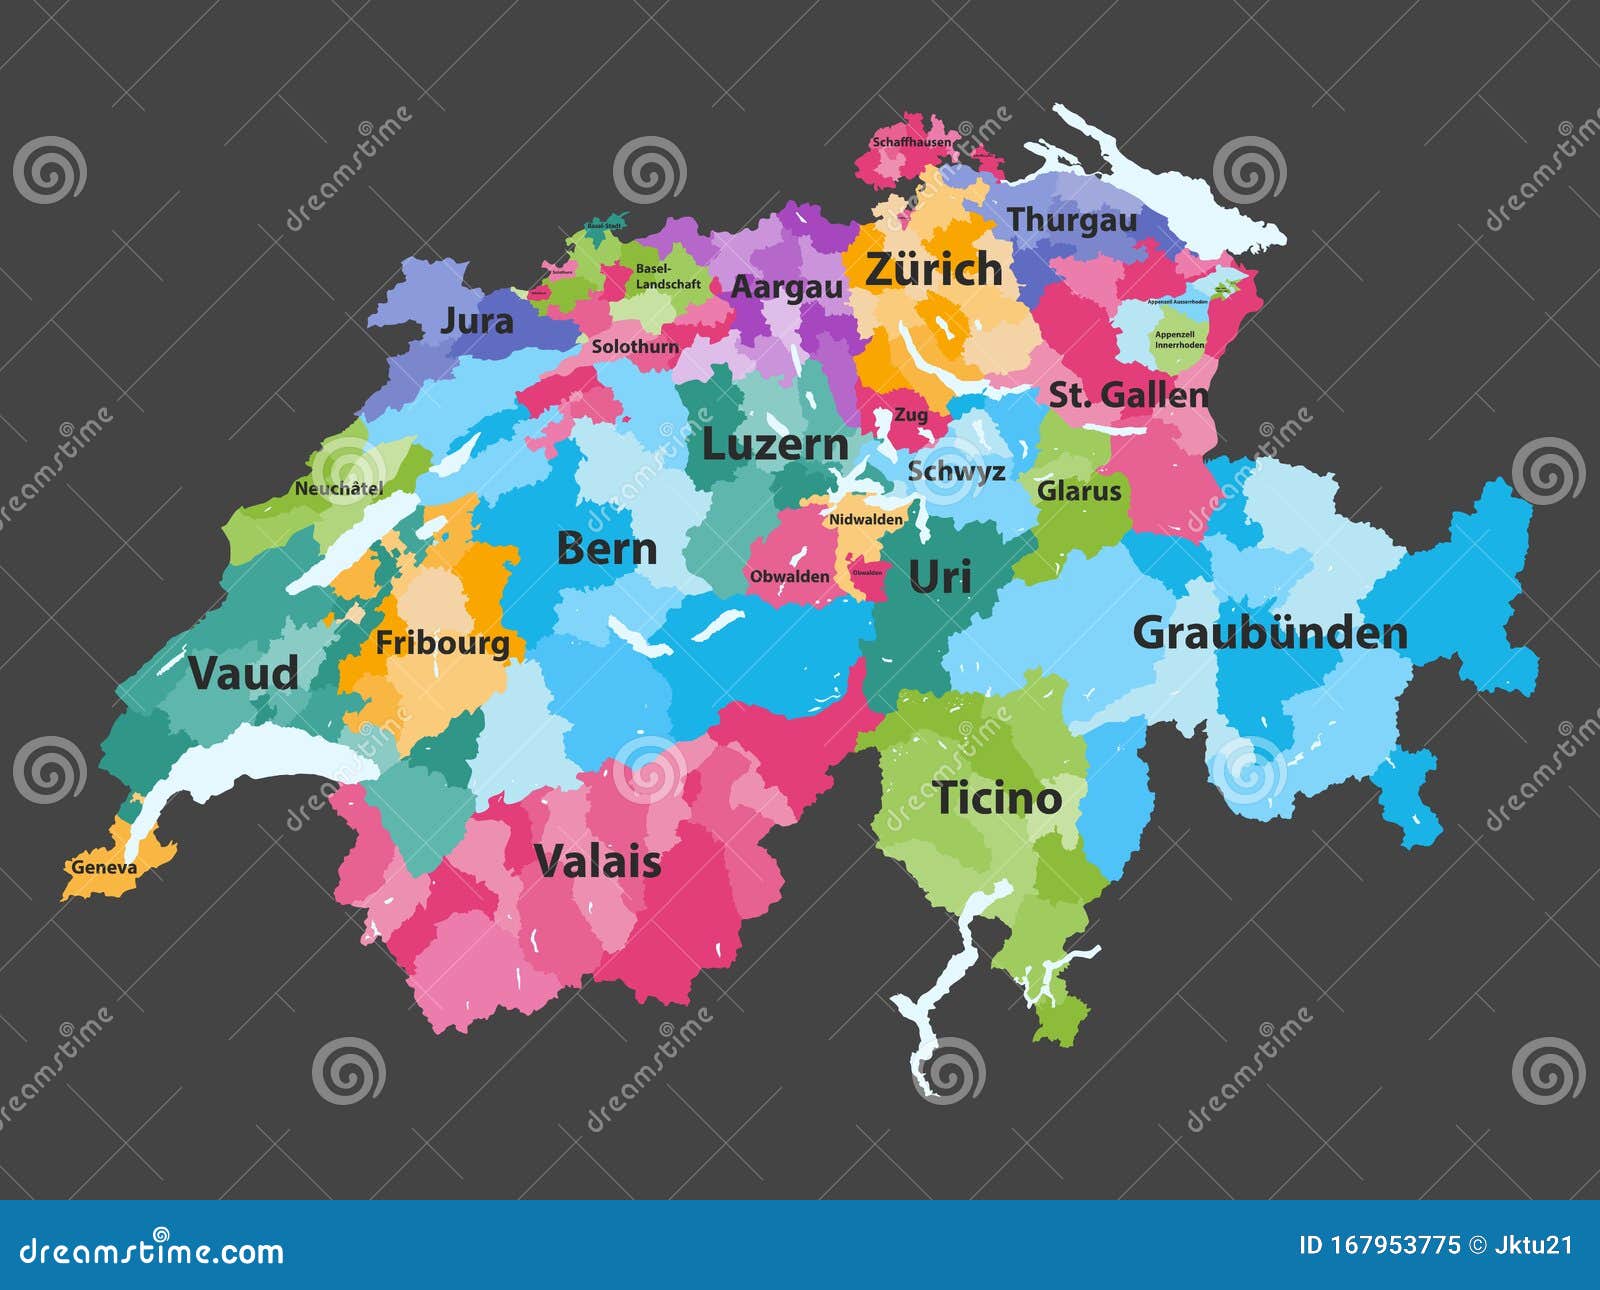 switzerland  map colored by cantons with districts boundaries